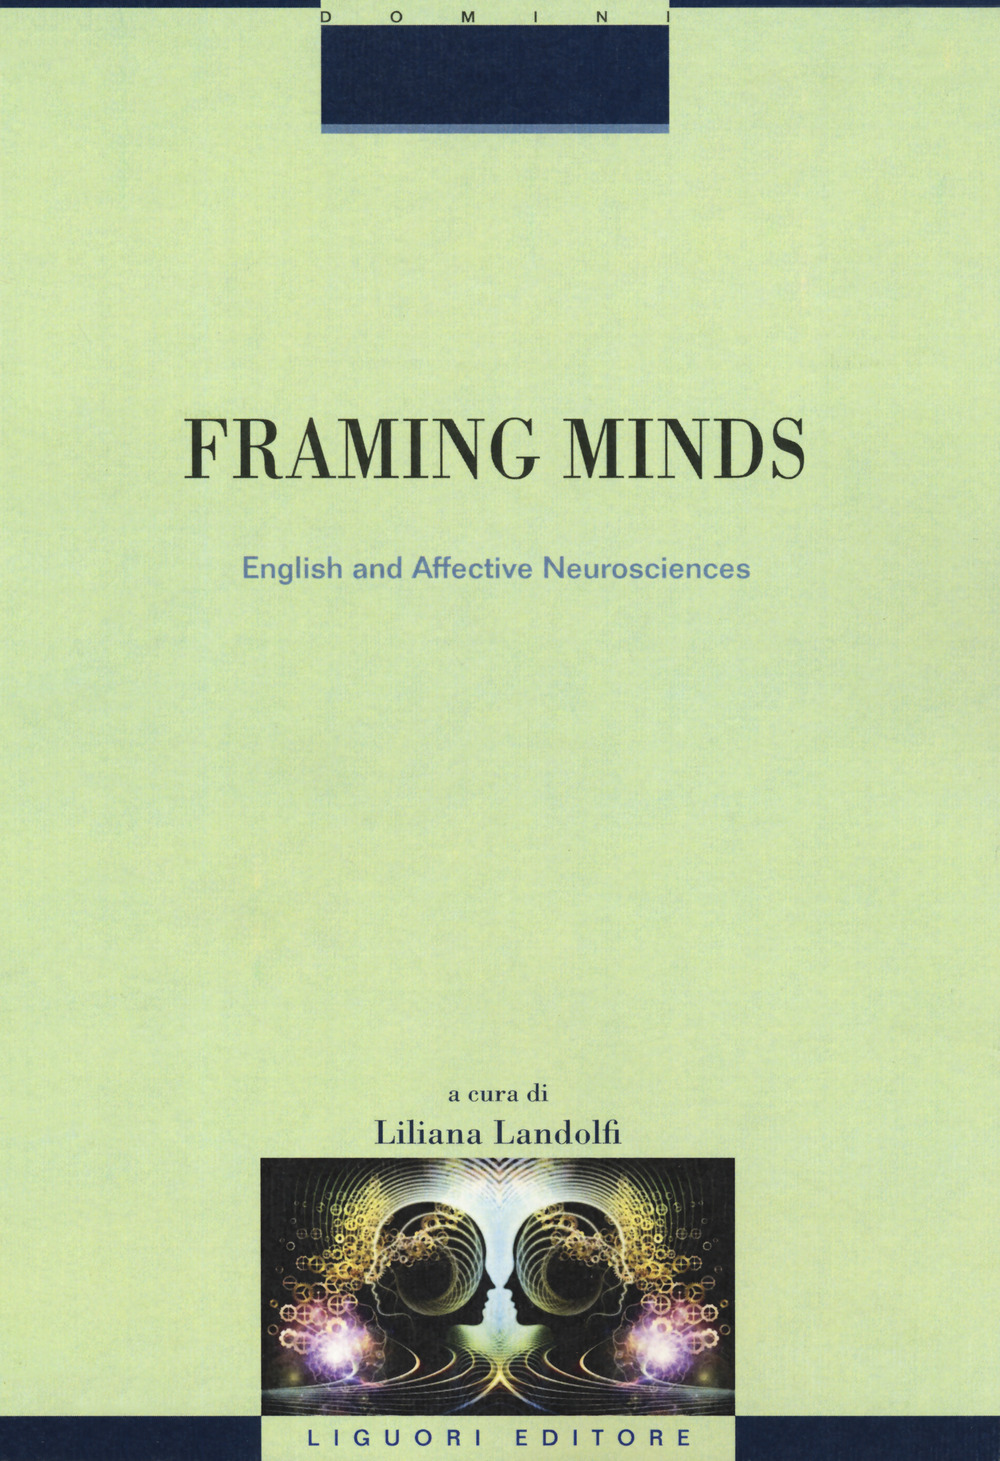 Framing minds. English and affective neurosciences